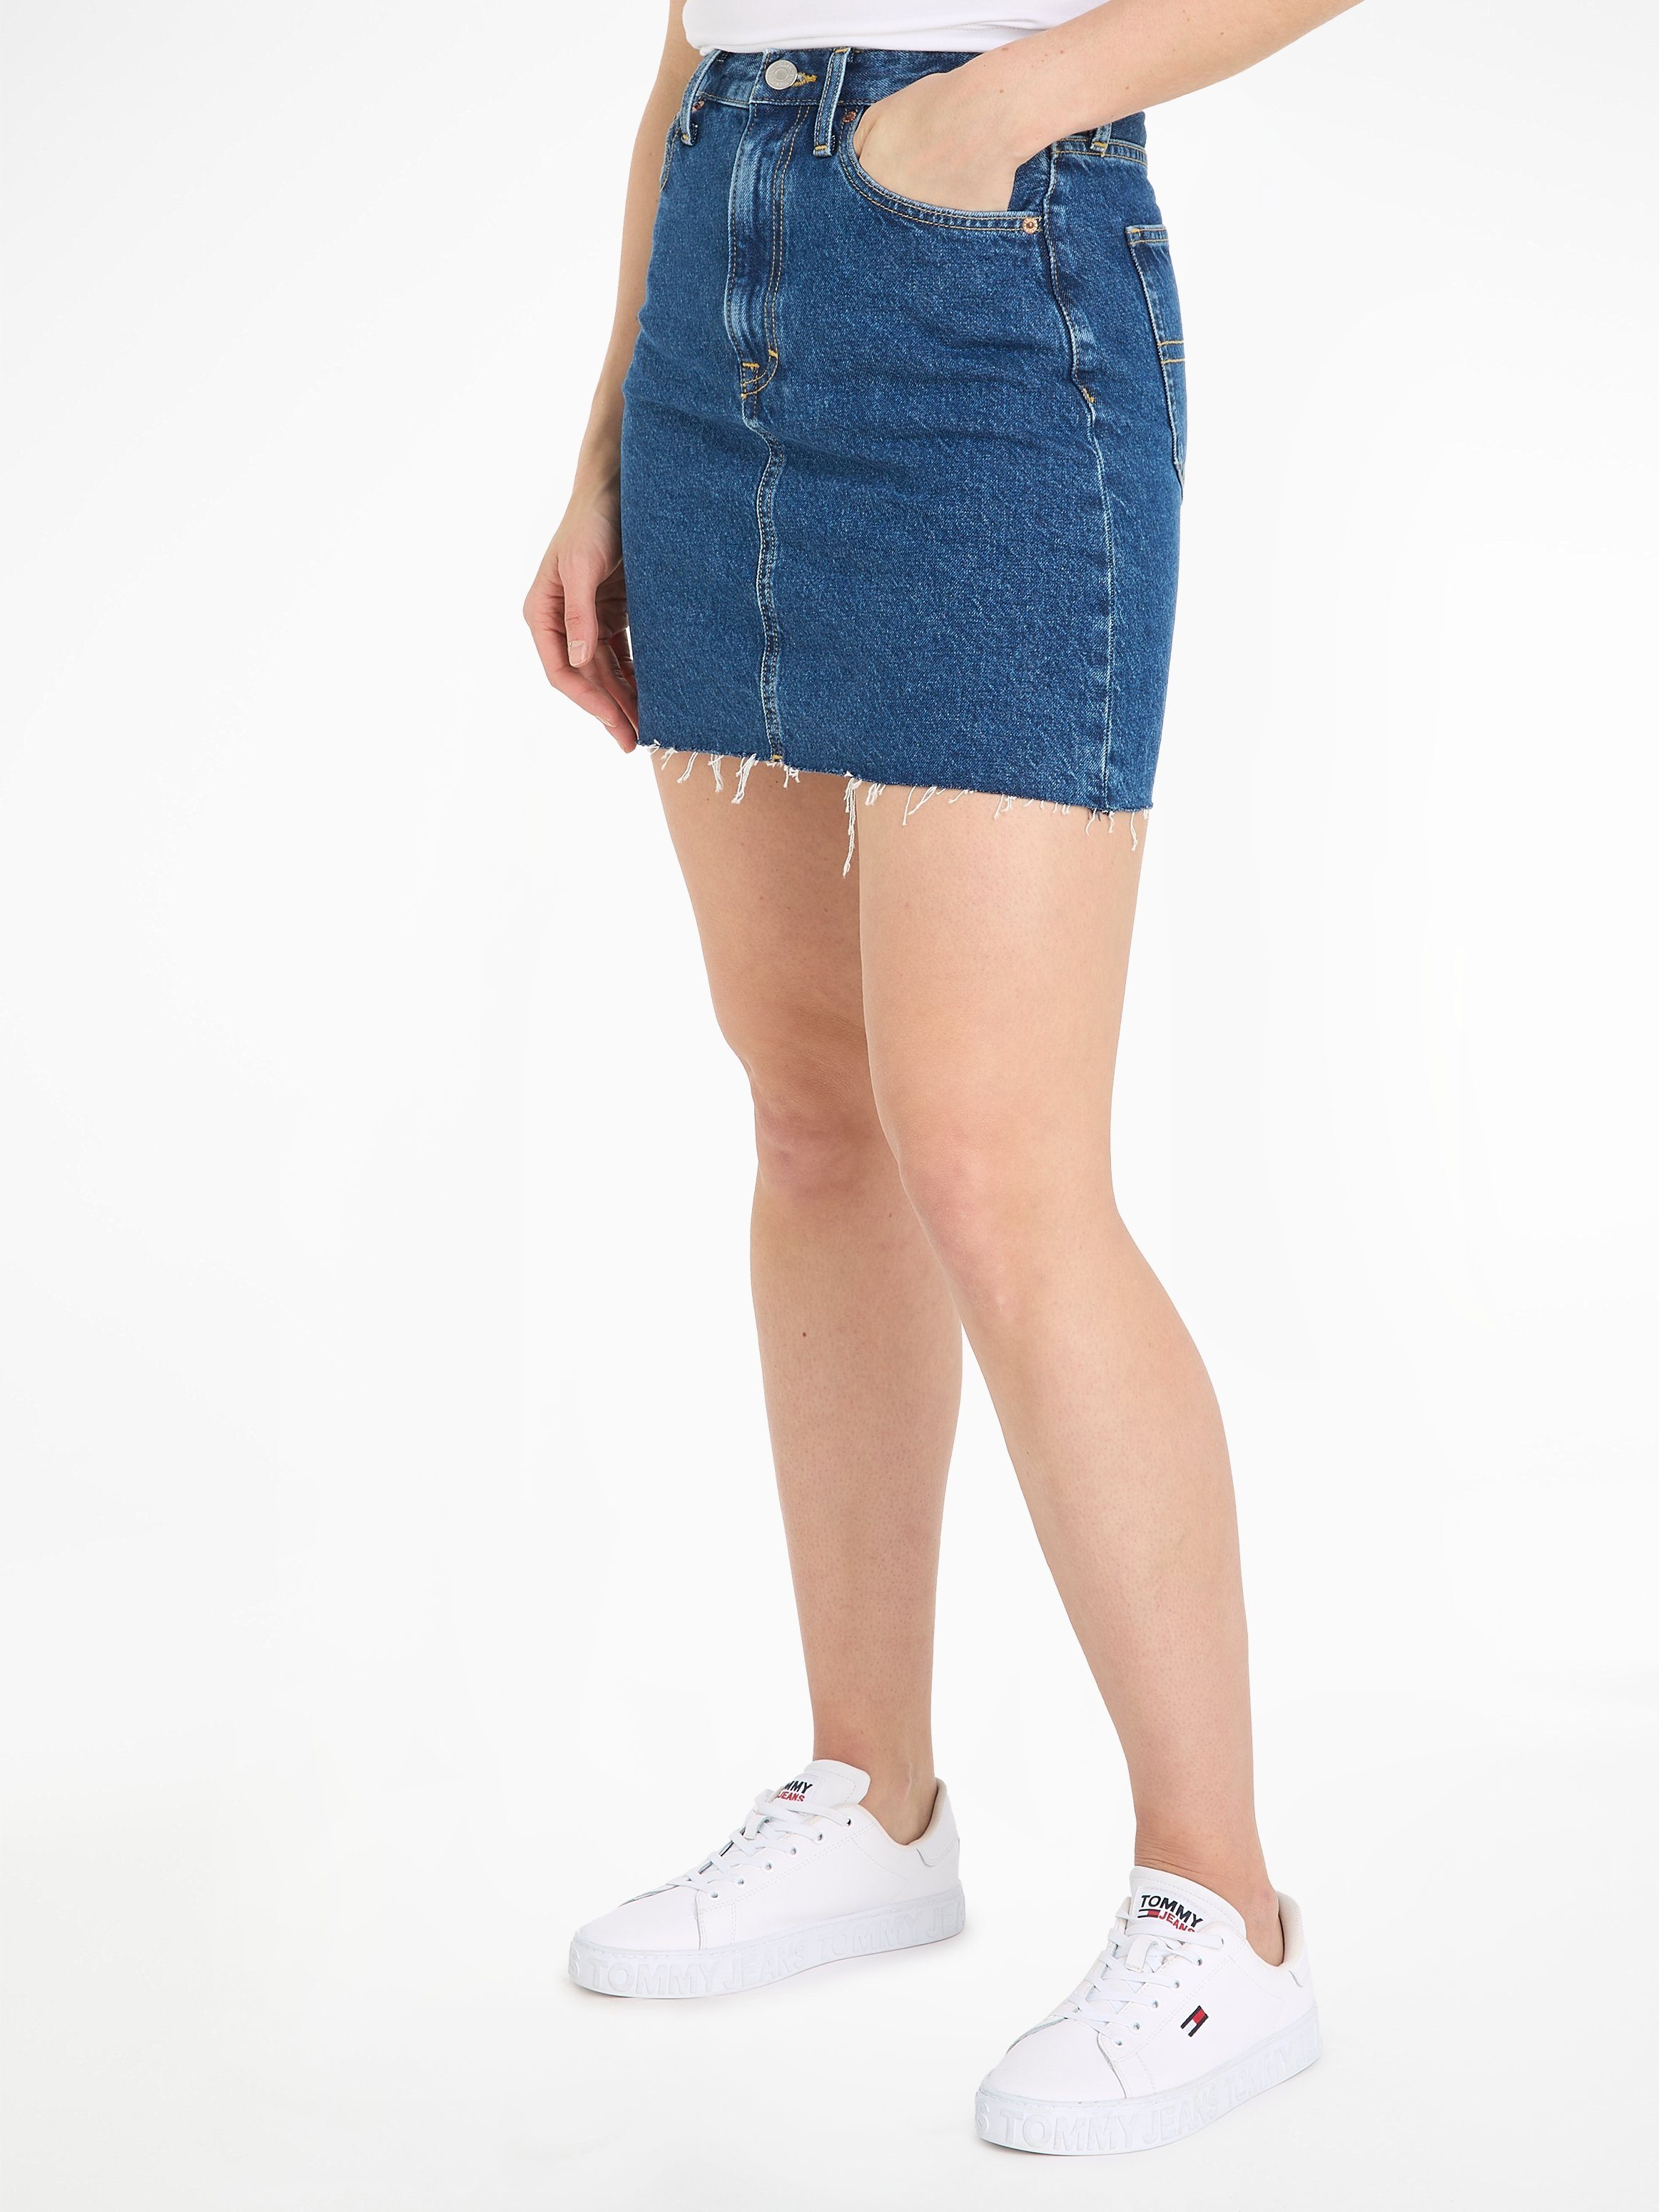 Logostickerei Jeansrock AH4035 UH SKIRT Jeans MOM Tommy mit